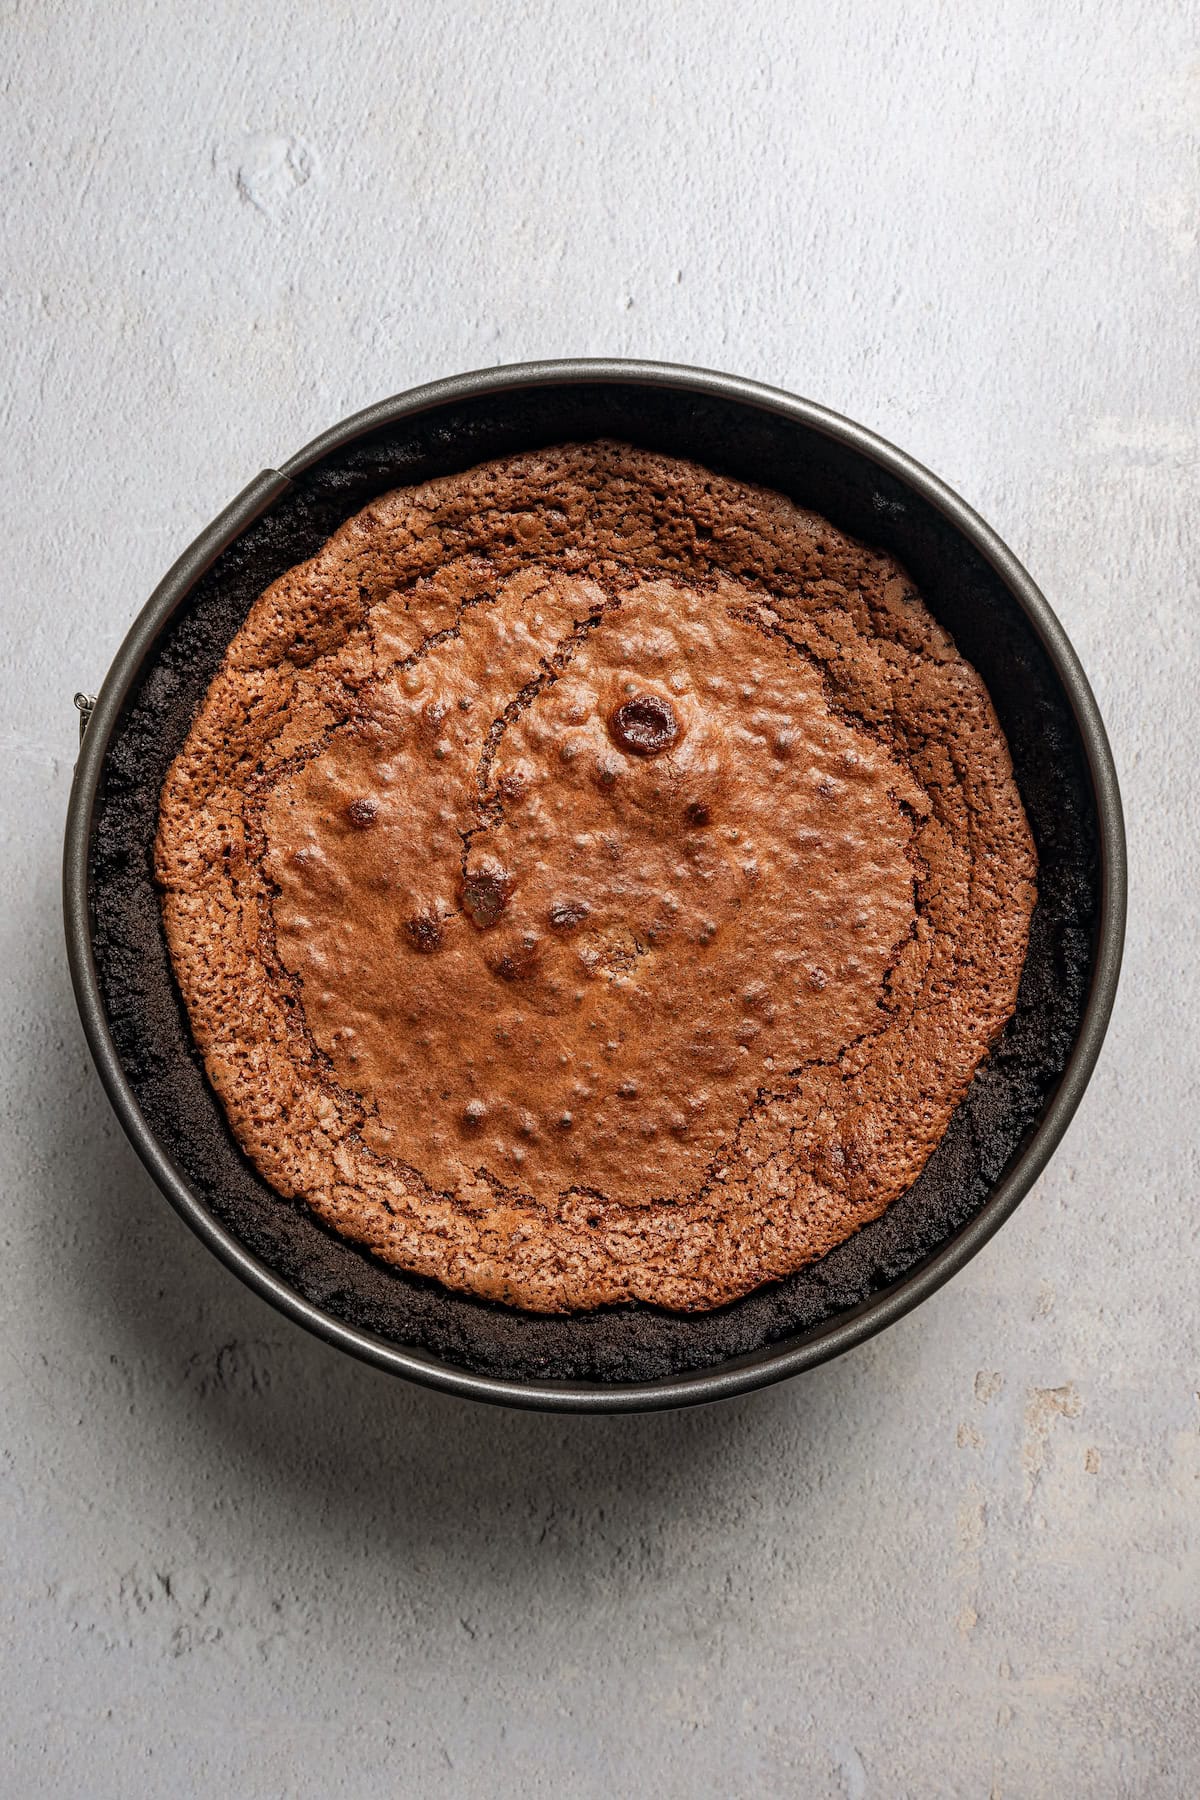 Overhead view of baked chocolate filling inside an Oreo crust in a round cake pan.